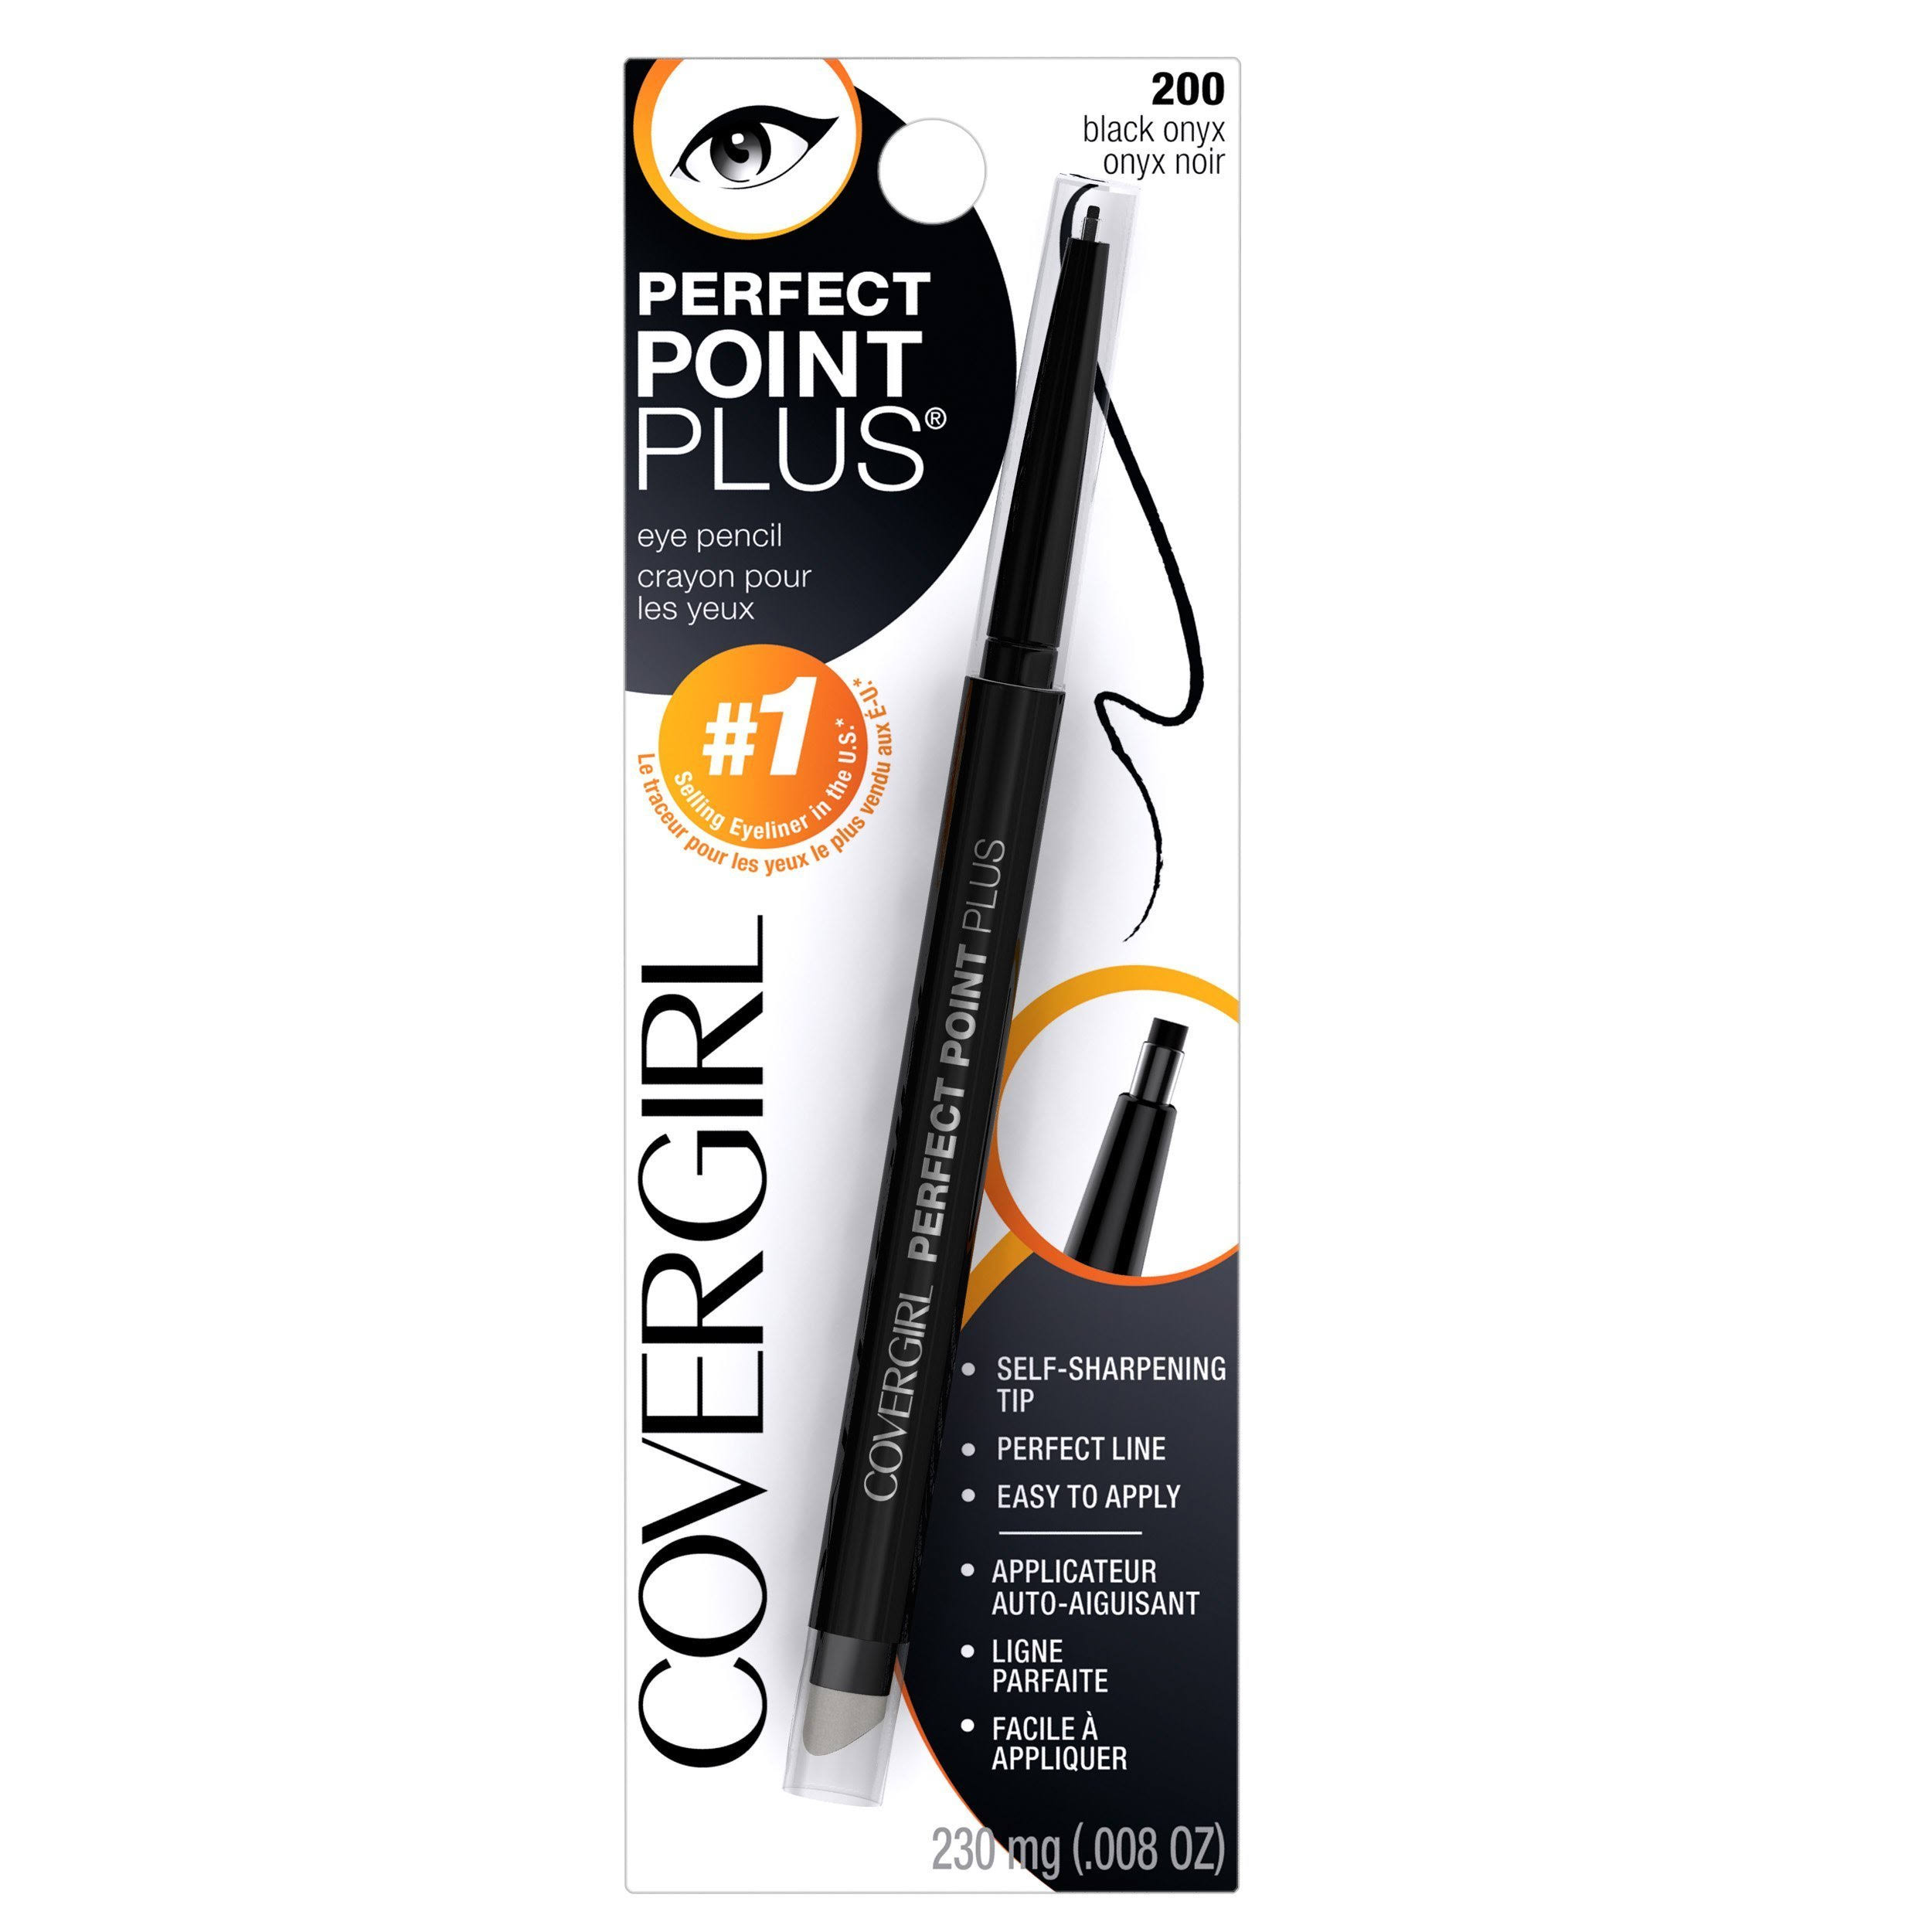 Covergirl Perfect Point Plus Eye Liner - 200 Black Onyx